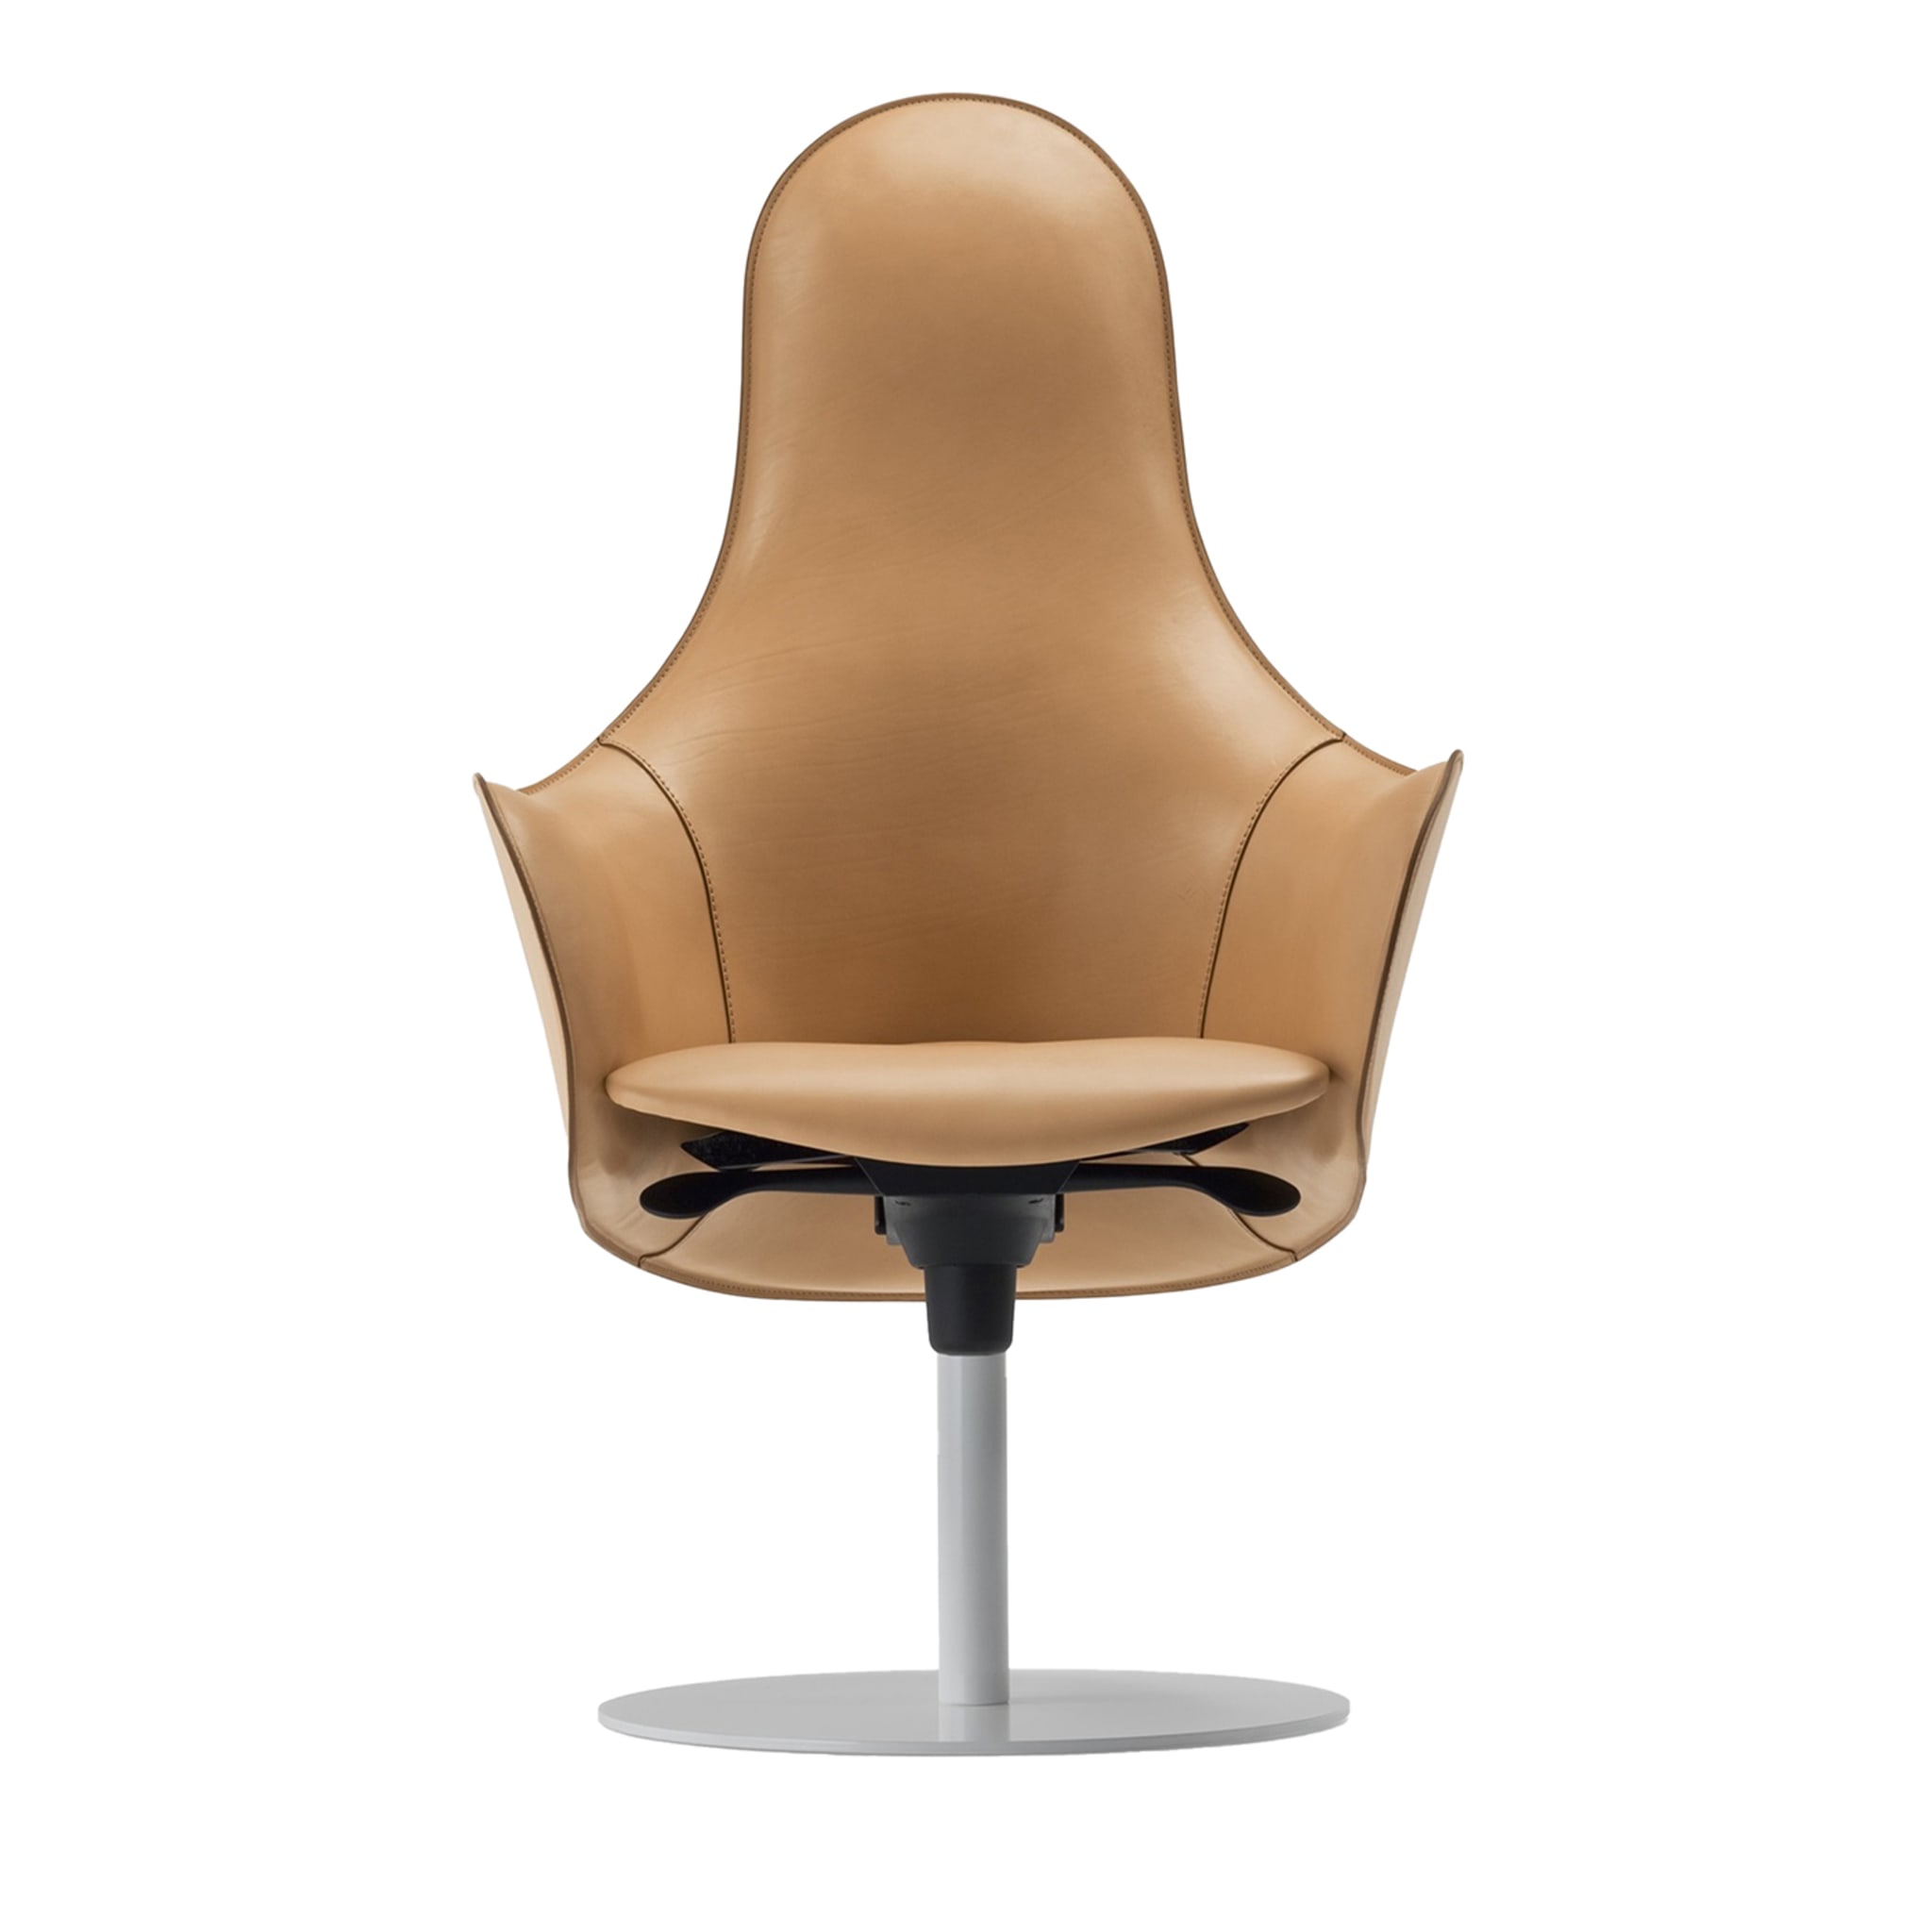 Hipod Fixed Base Chair by Giulio Manzoni - Main view